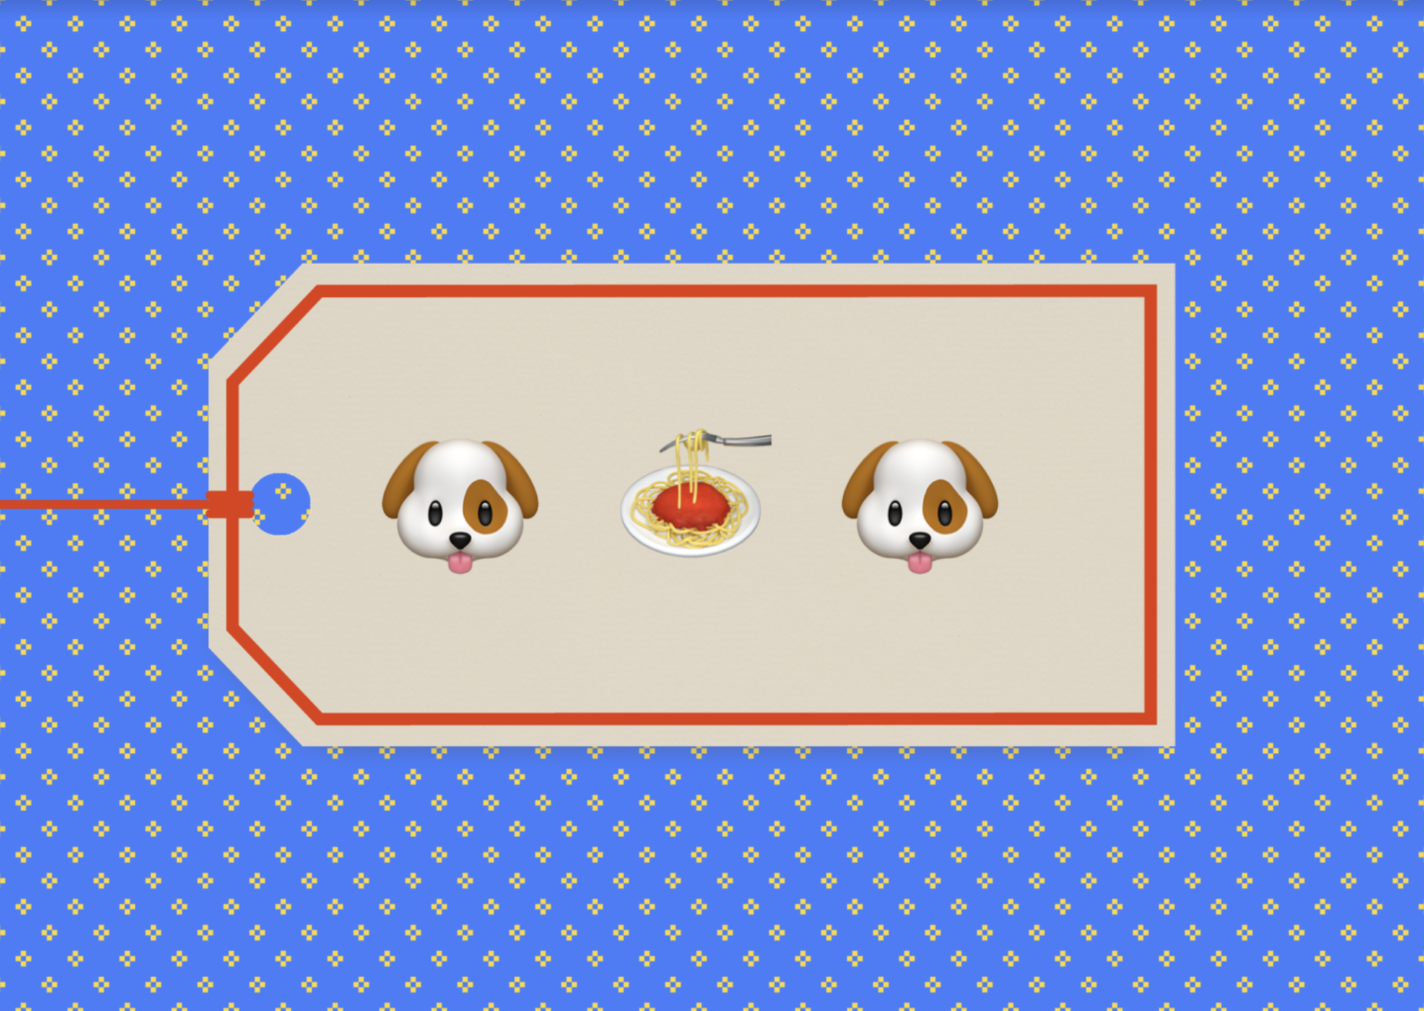 Christmas gift tag on a blue background with yellow dots. On the tag is a dog emoji, a plate of spaghetti emoji, and a dog emoji